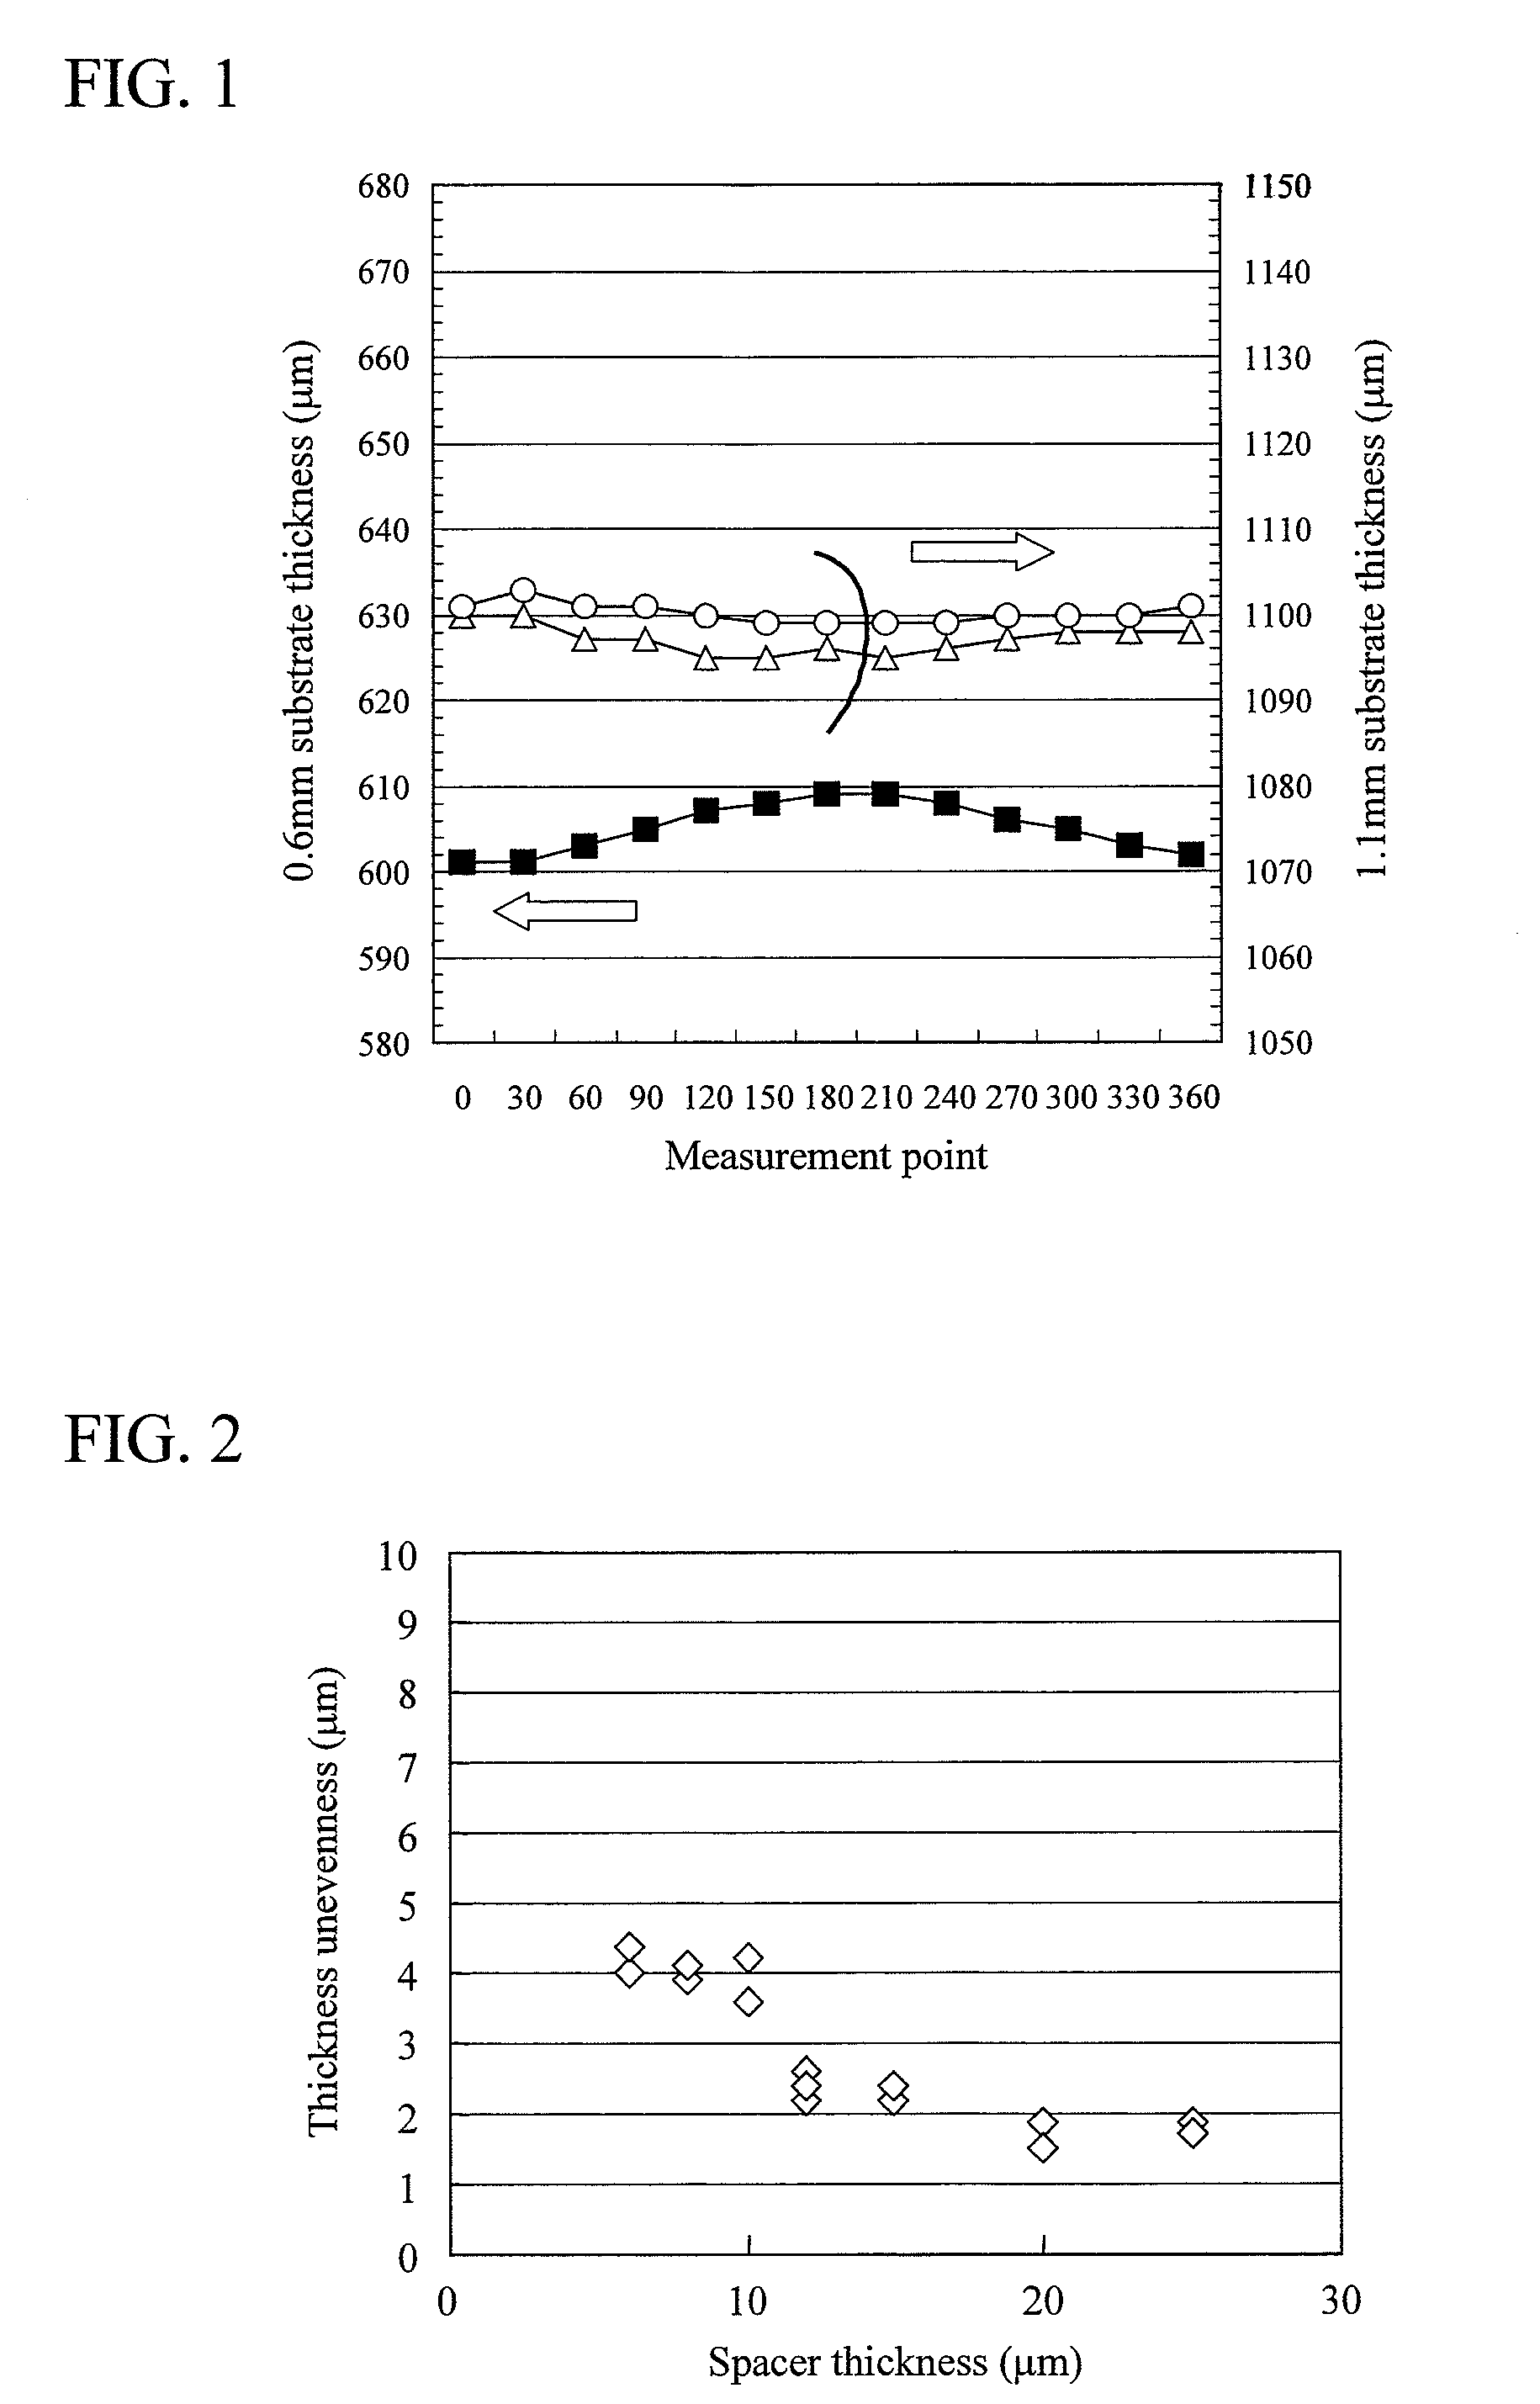 Multi-information-layer recording medium and manufacturing process